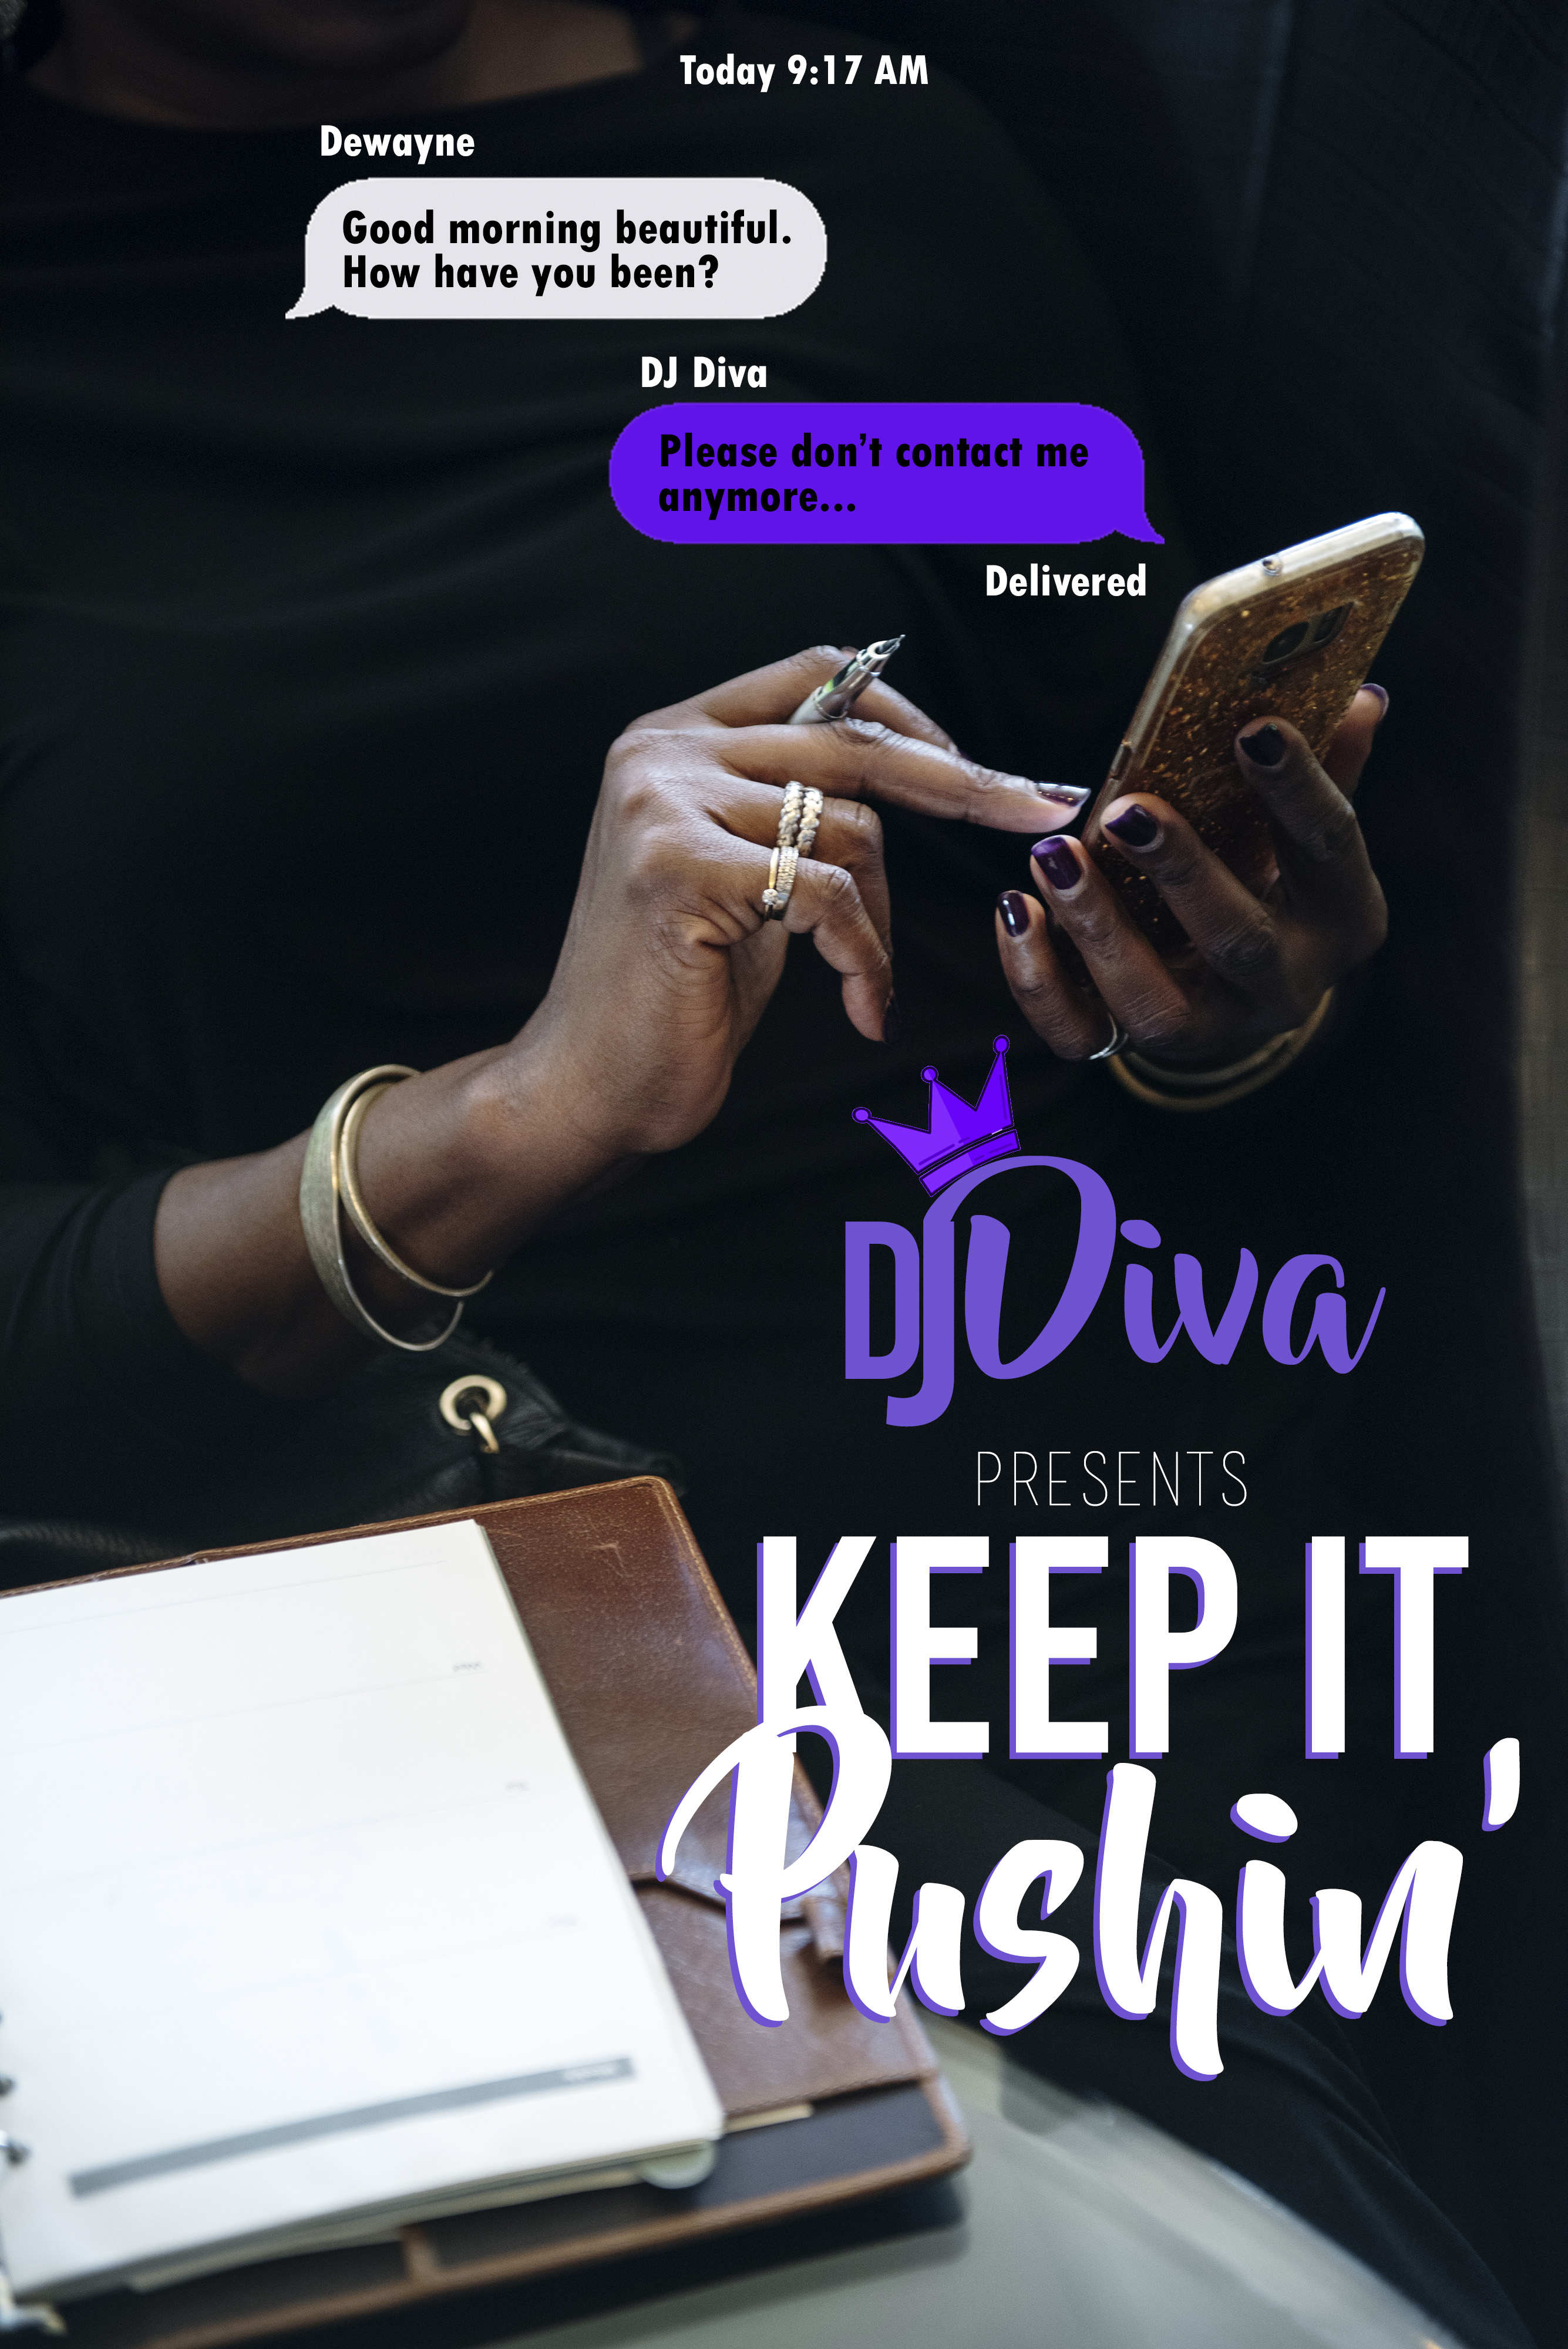 DJ Diva-The MIXTRESS of R and B: Latest post